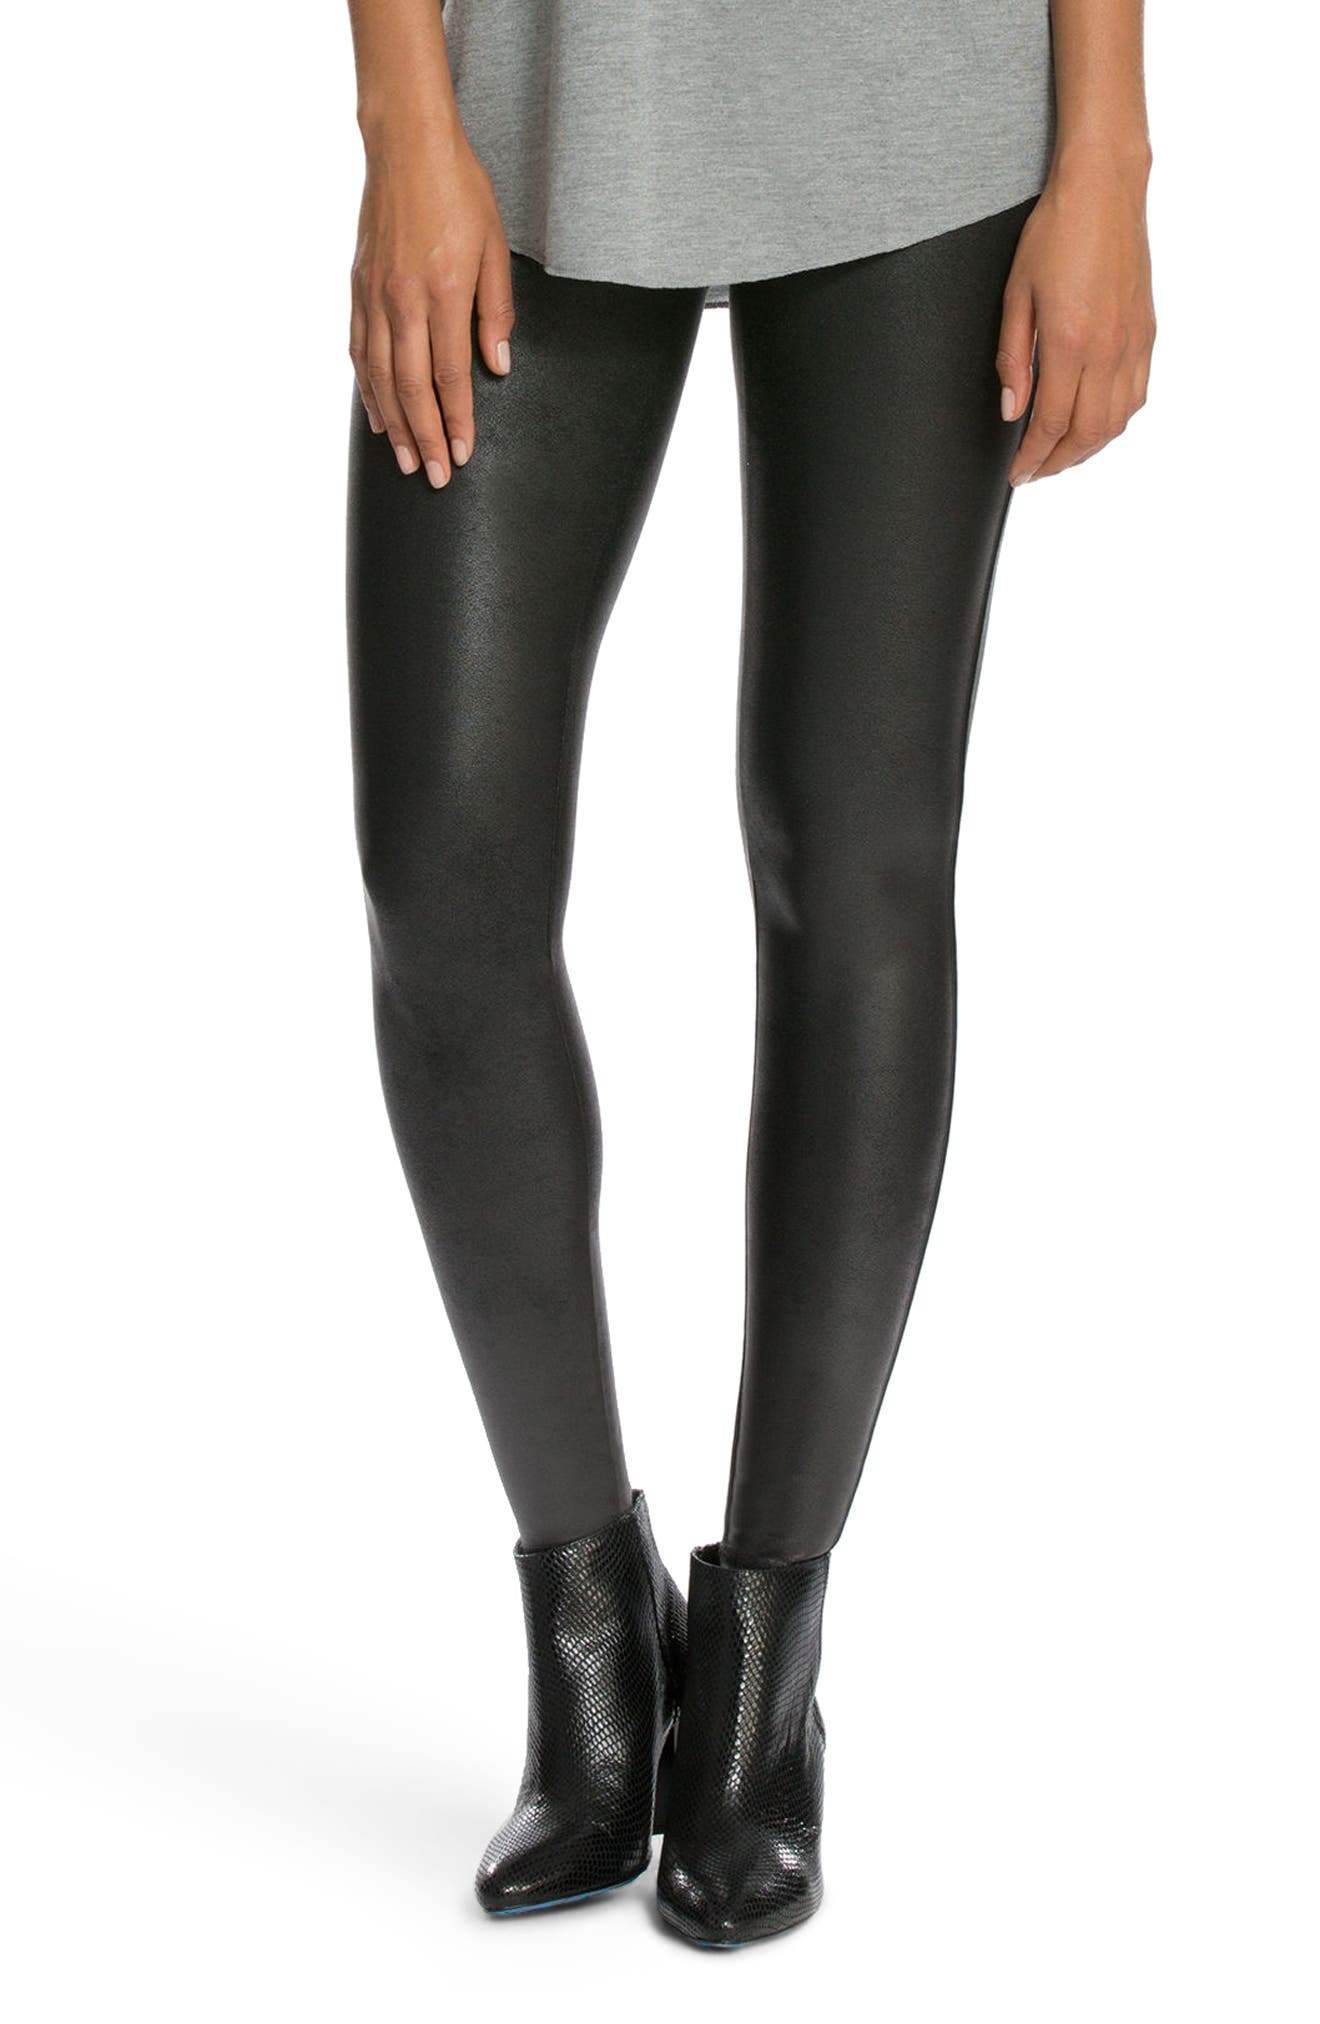 where can i get leather leggings